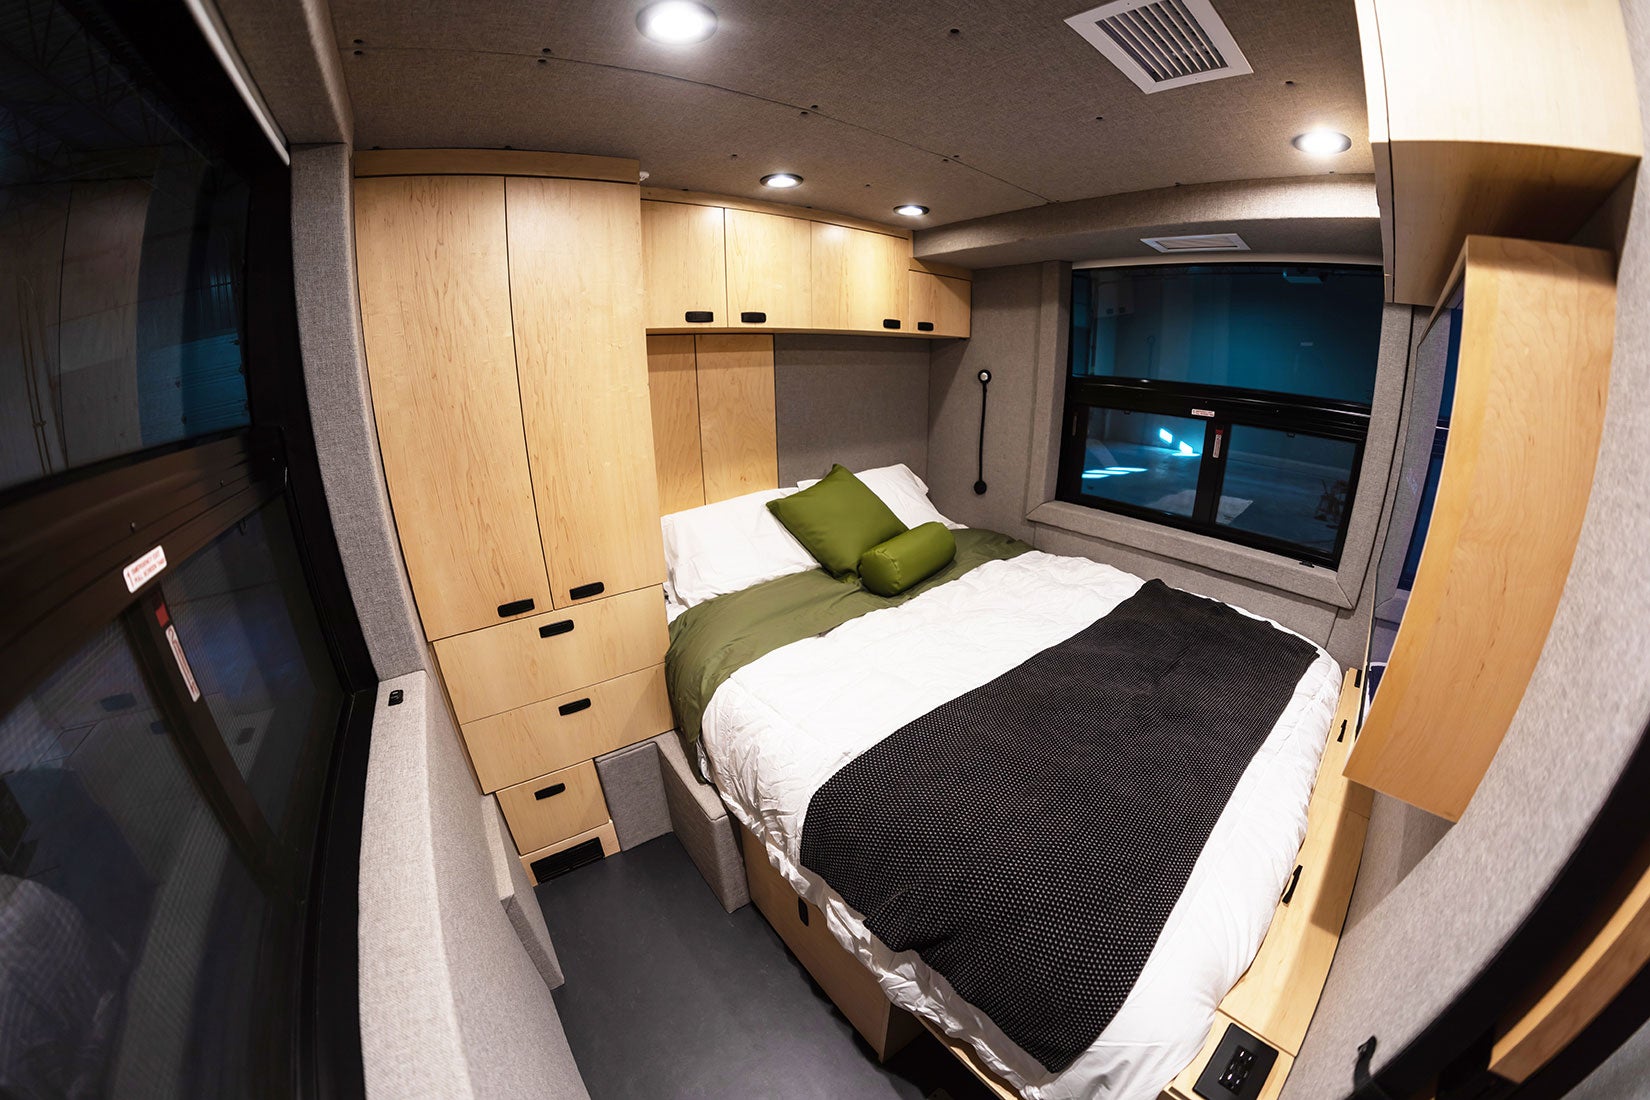 This Massive Prevost RV Sets the ‘Off-Road Life’ in a Cozy Lap of Luxury